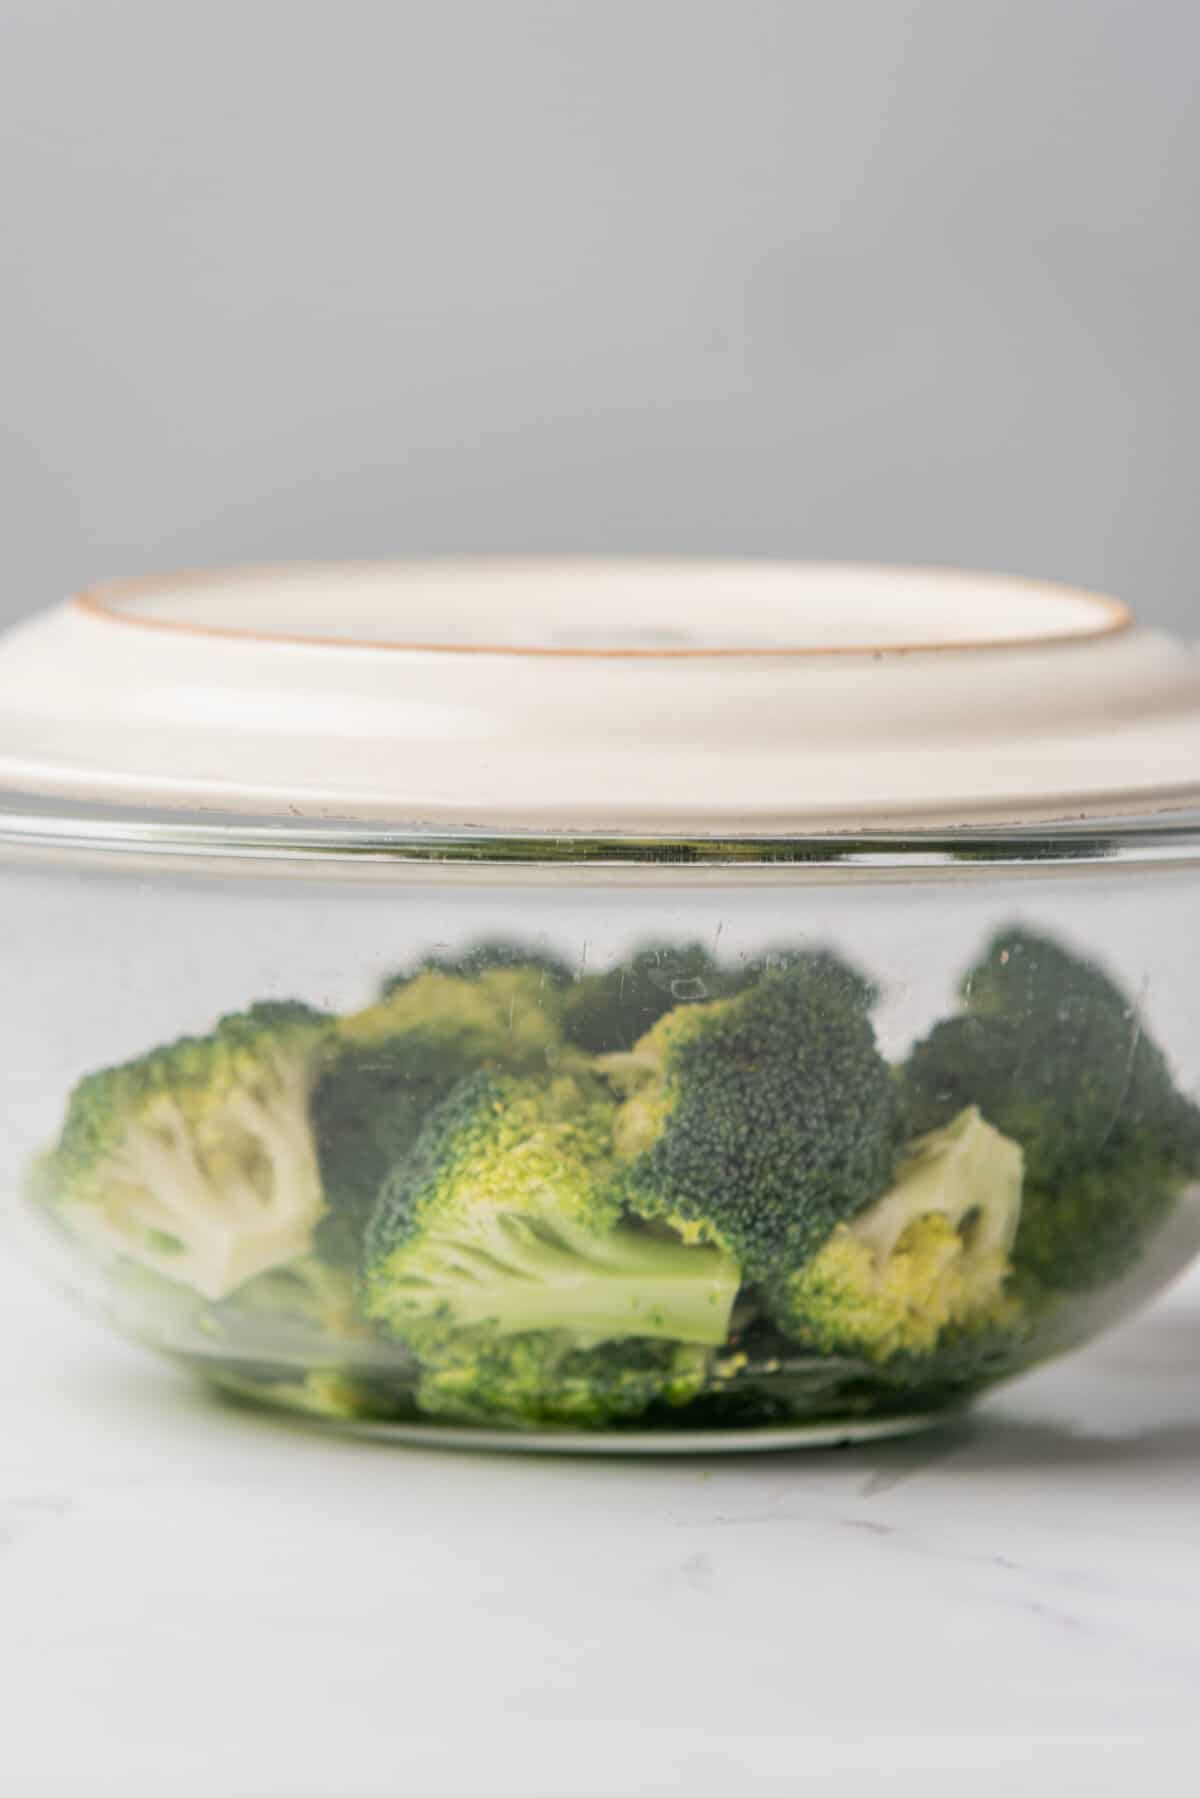 An image of broccoli in a bowl being covered by a plate